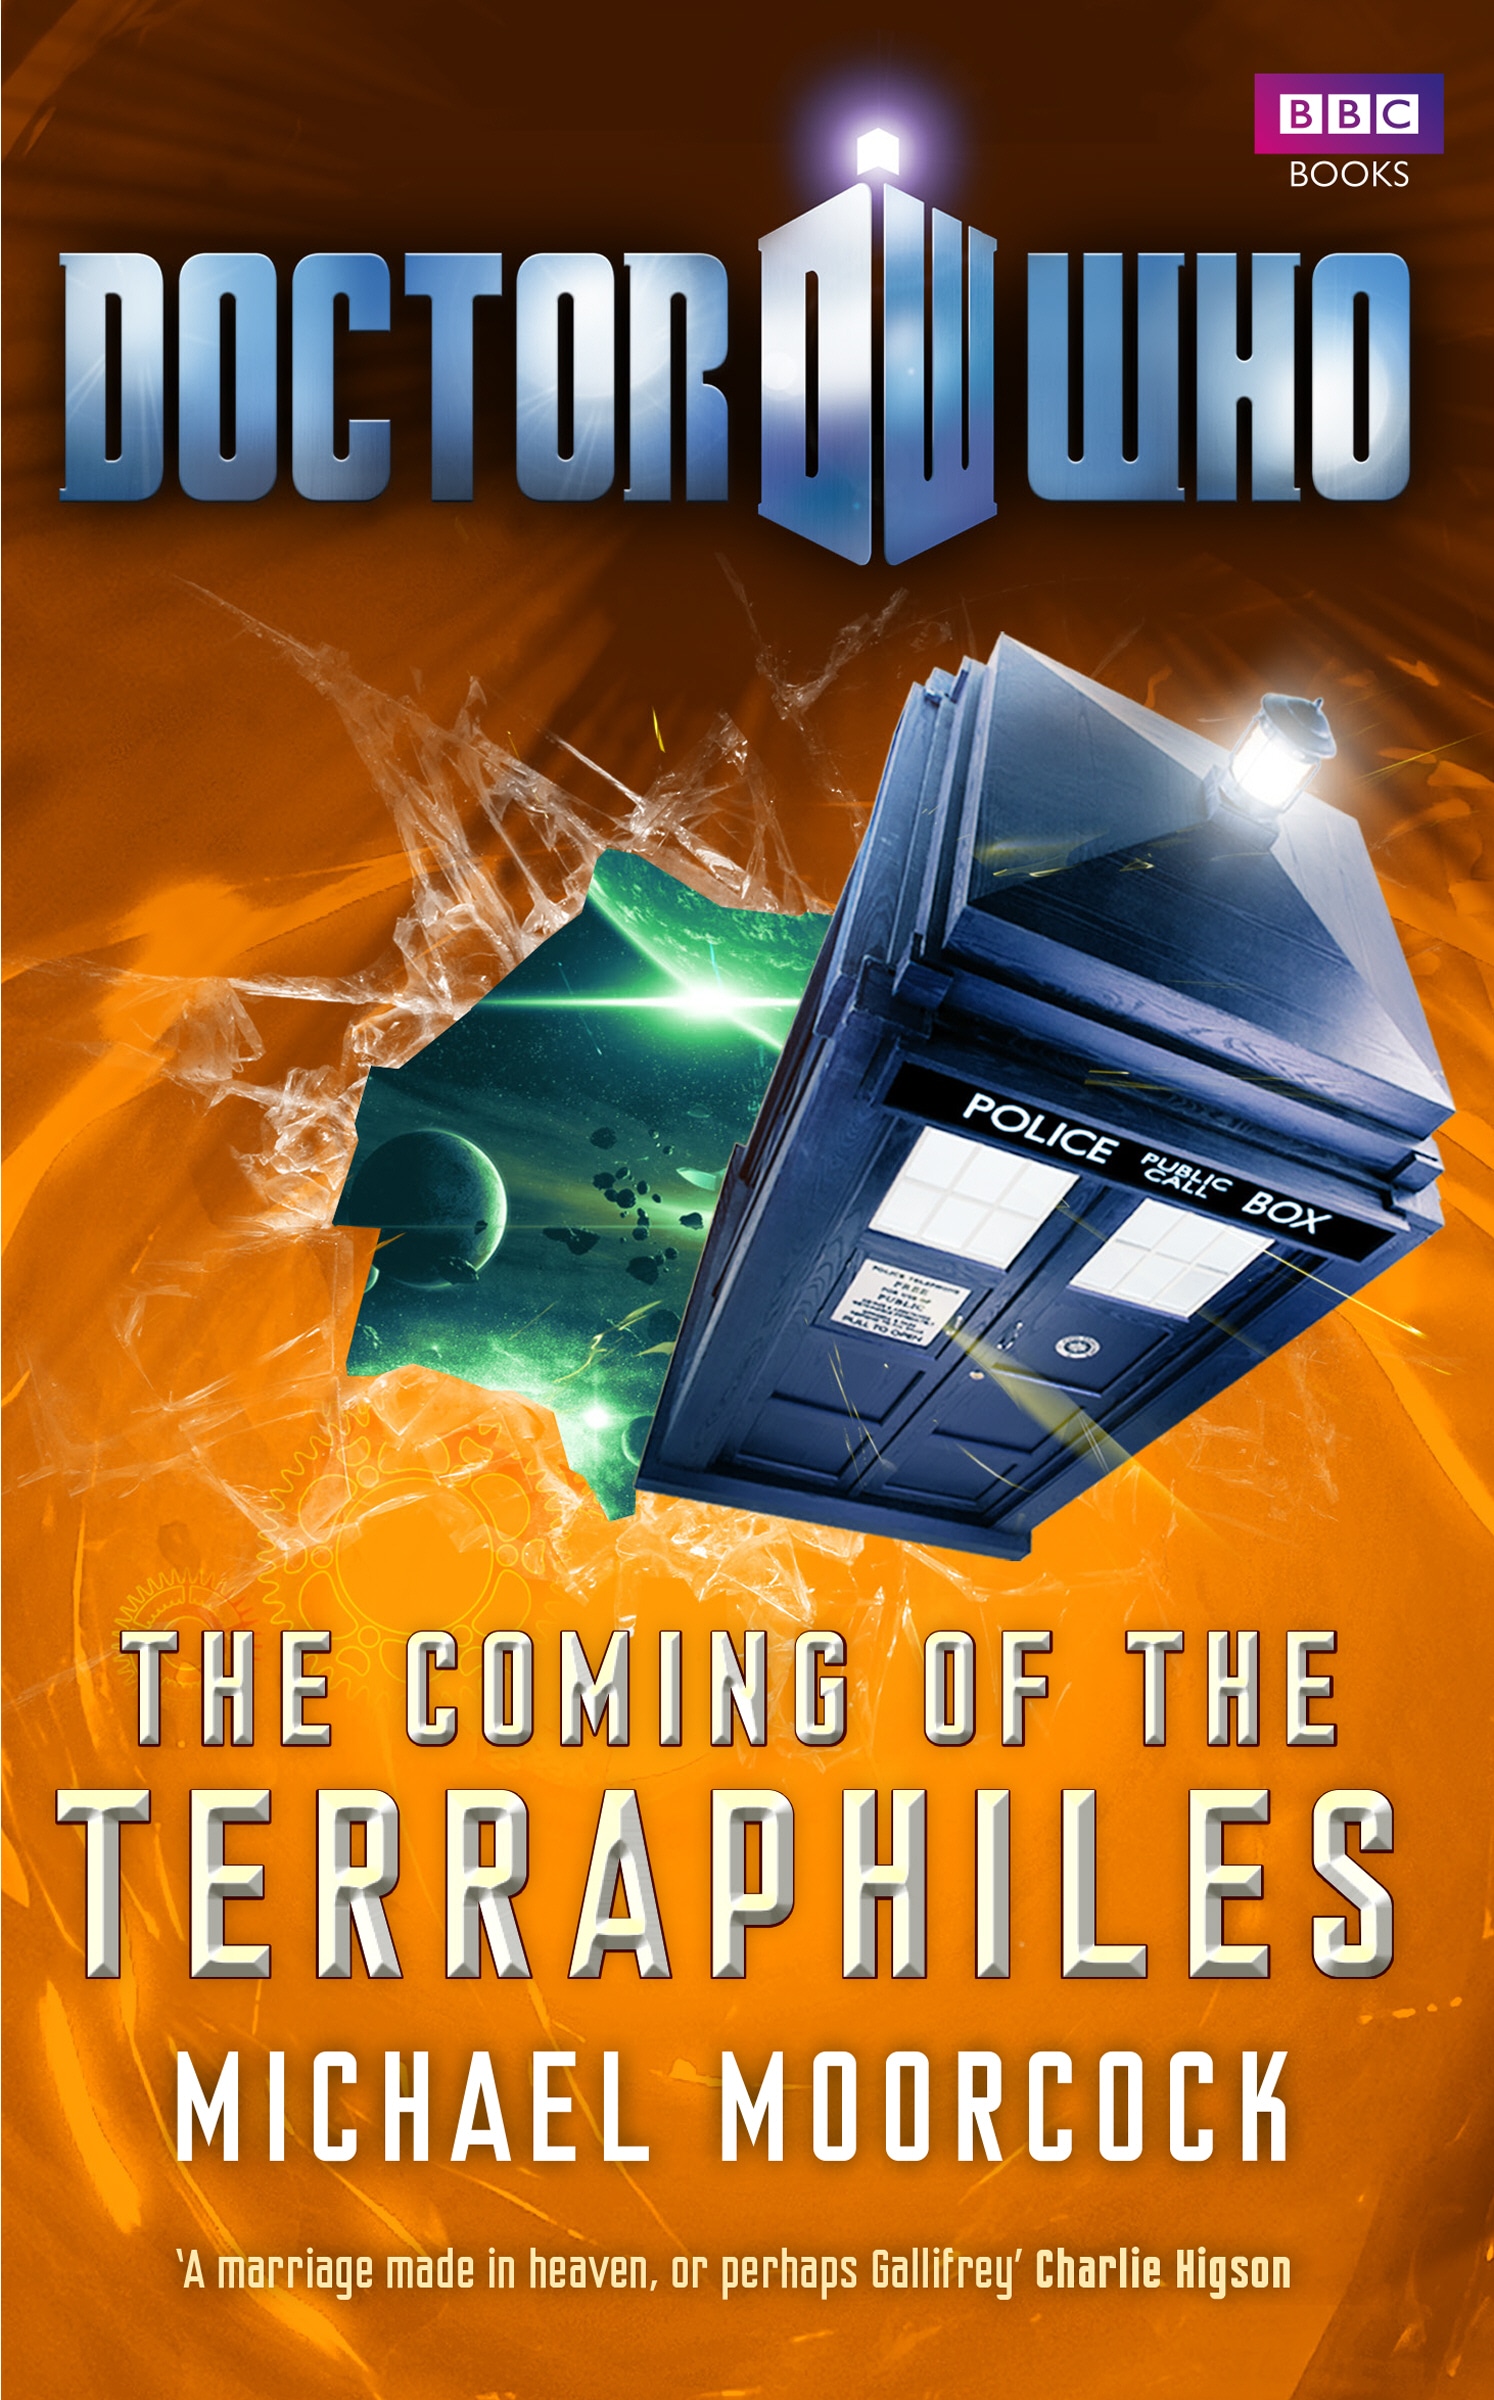 Book “Doctor Who: The Coming of the Terraphiles” by Michael Moorcock — August 4, 2011